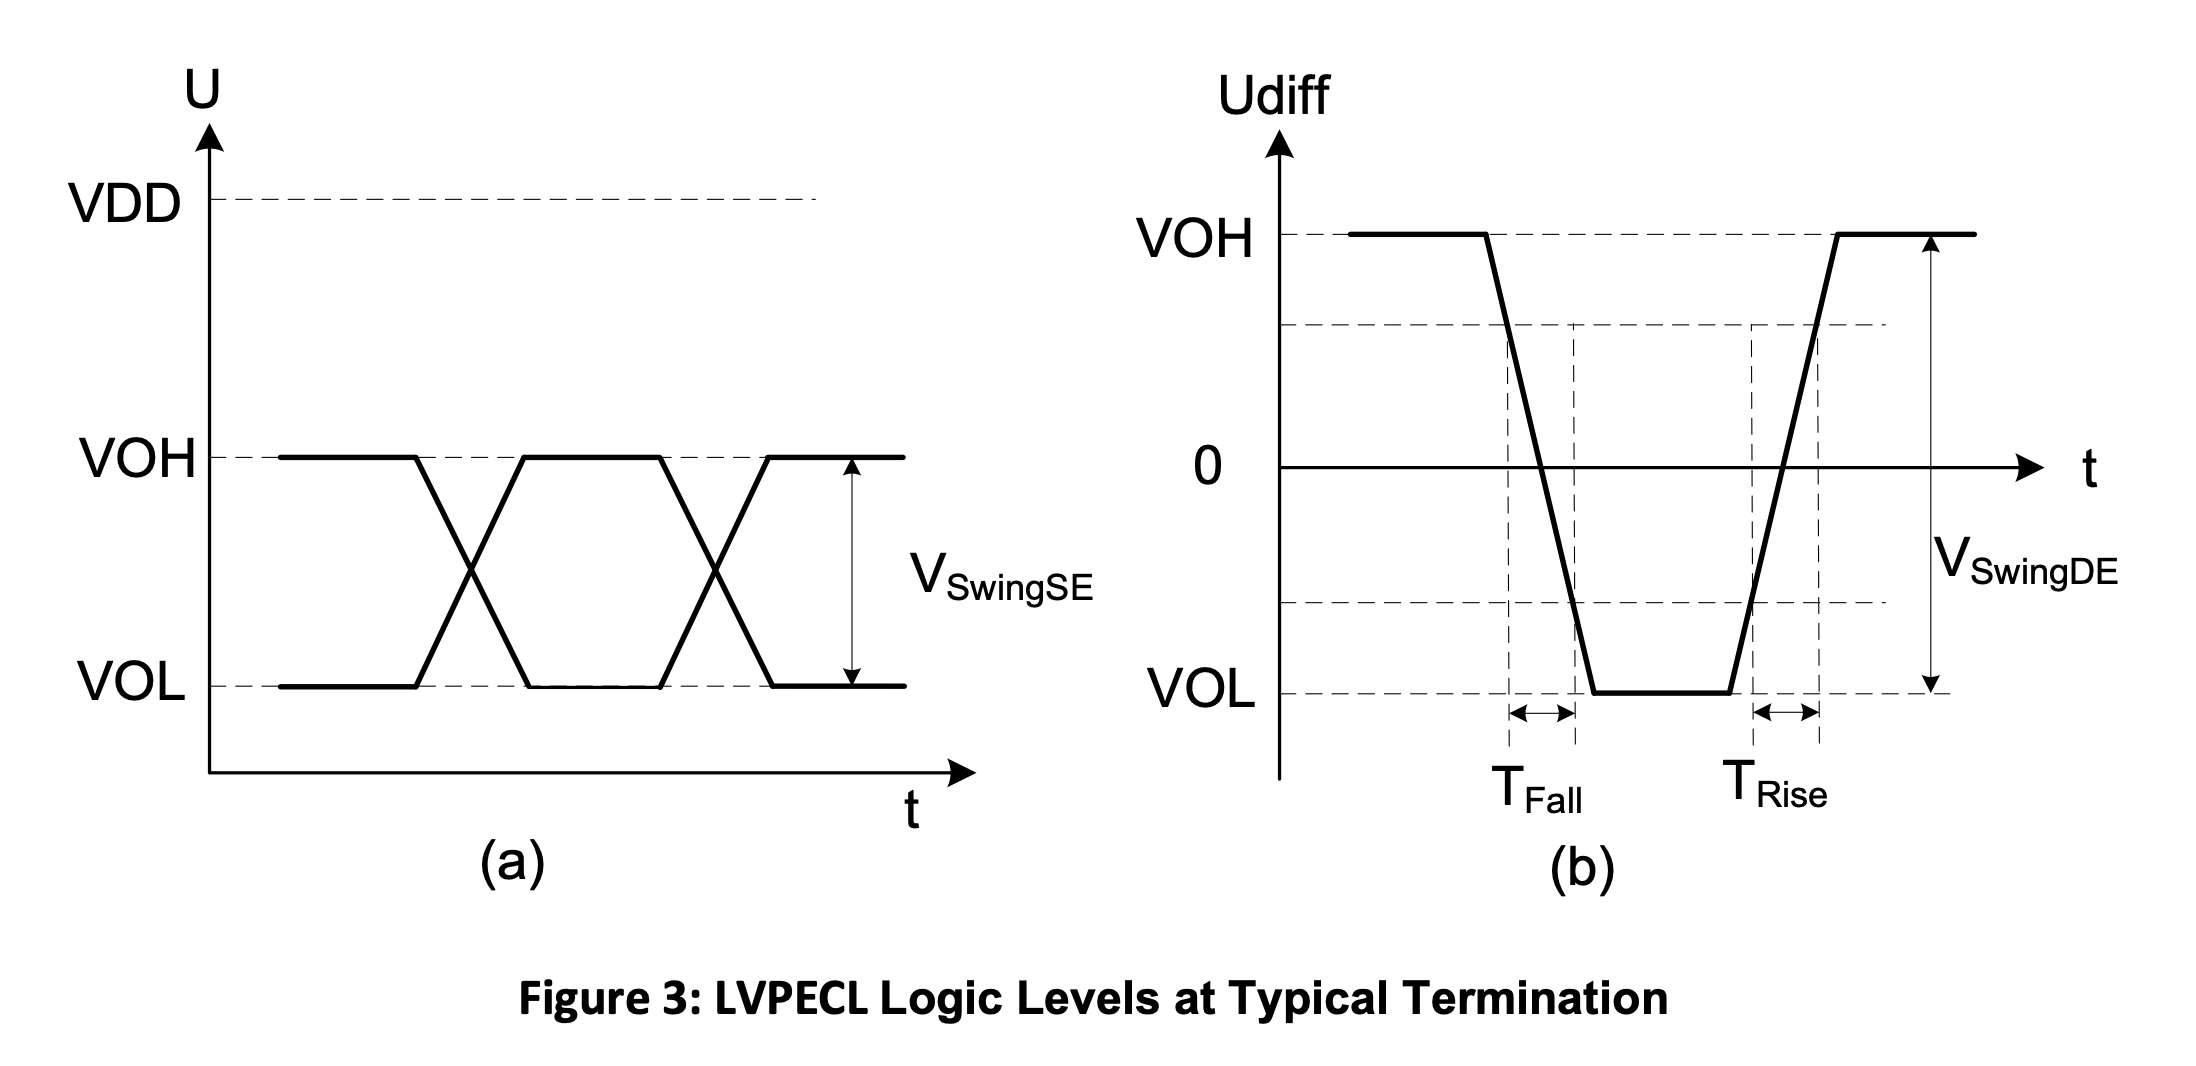 Figure 3 LVPECL Logic Levels at Typical Termination